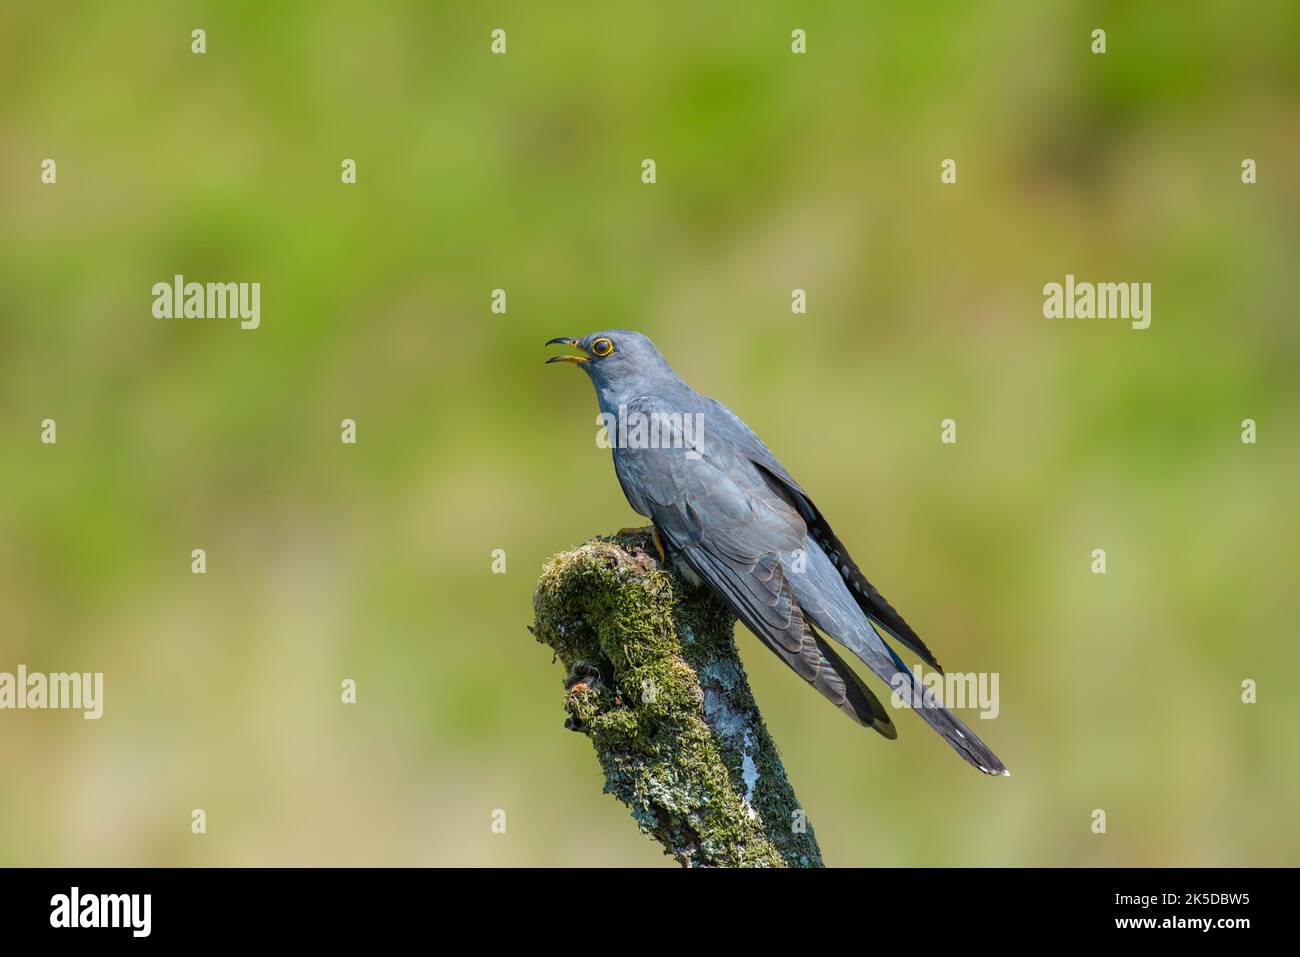 Cuckoo, Cuculus canorus, perched on a lichen covered branch Stock Photo